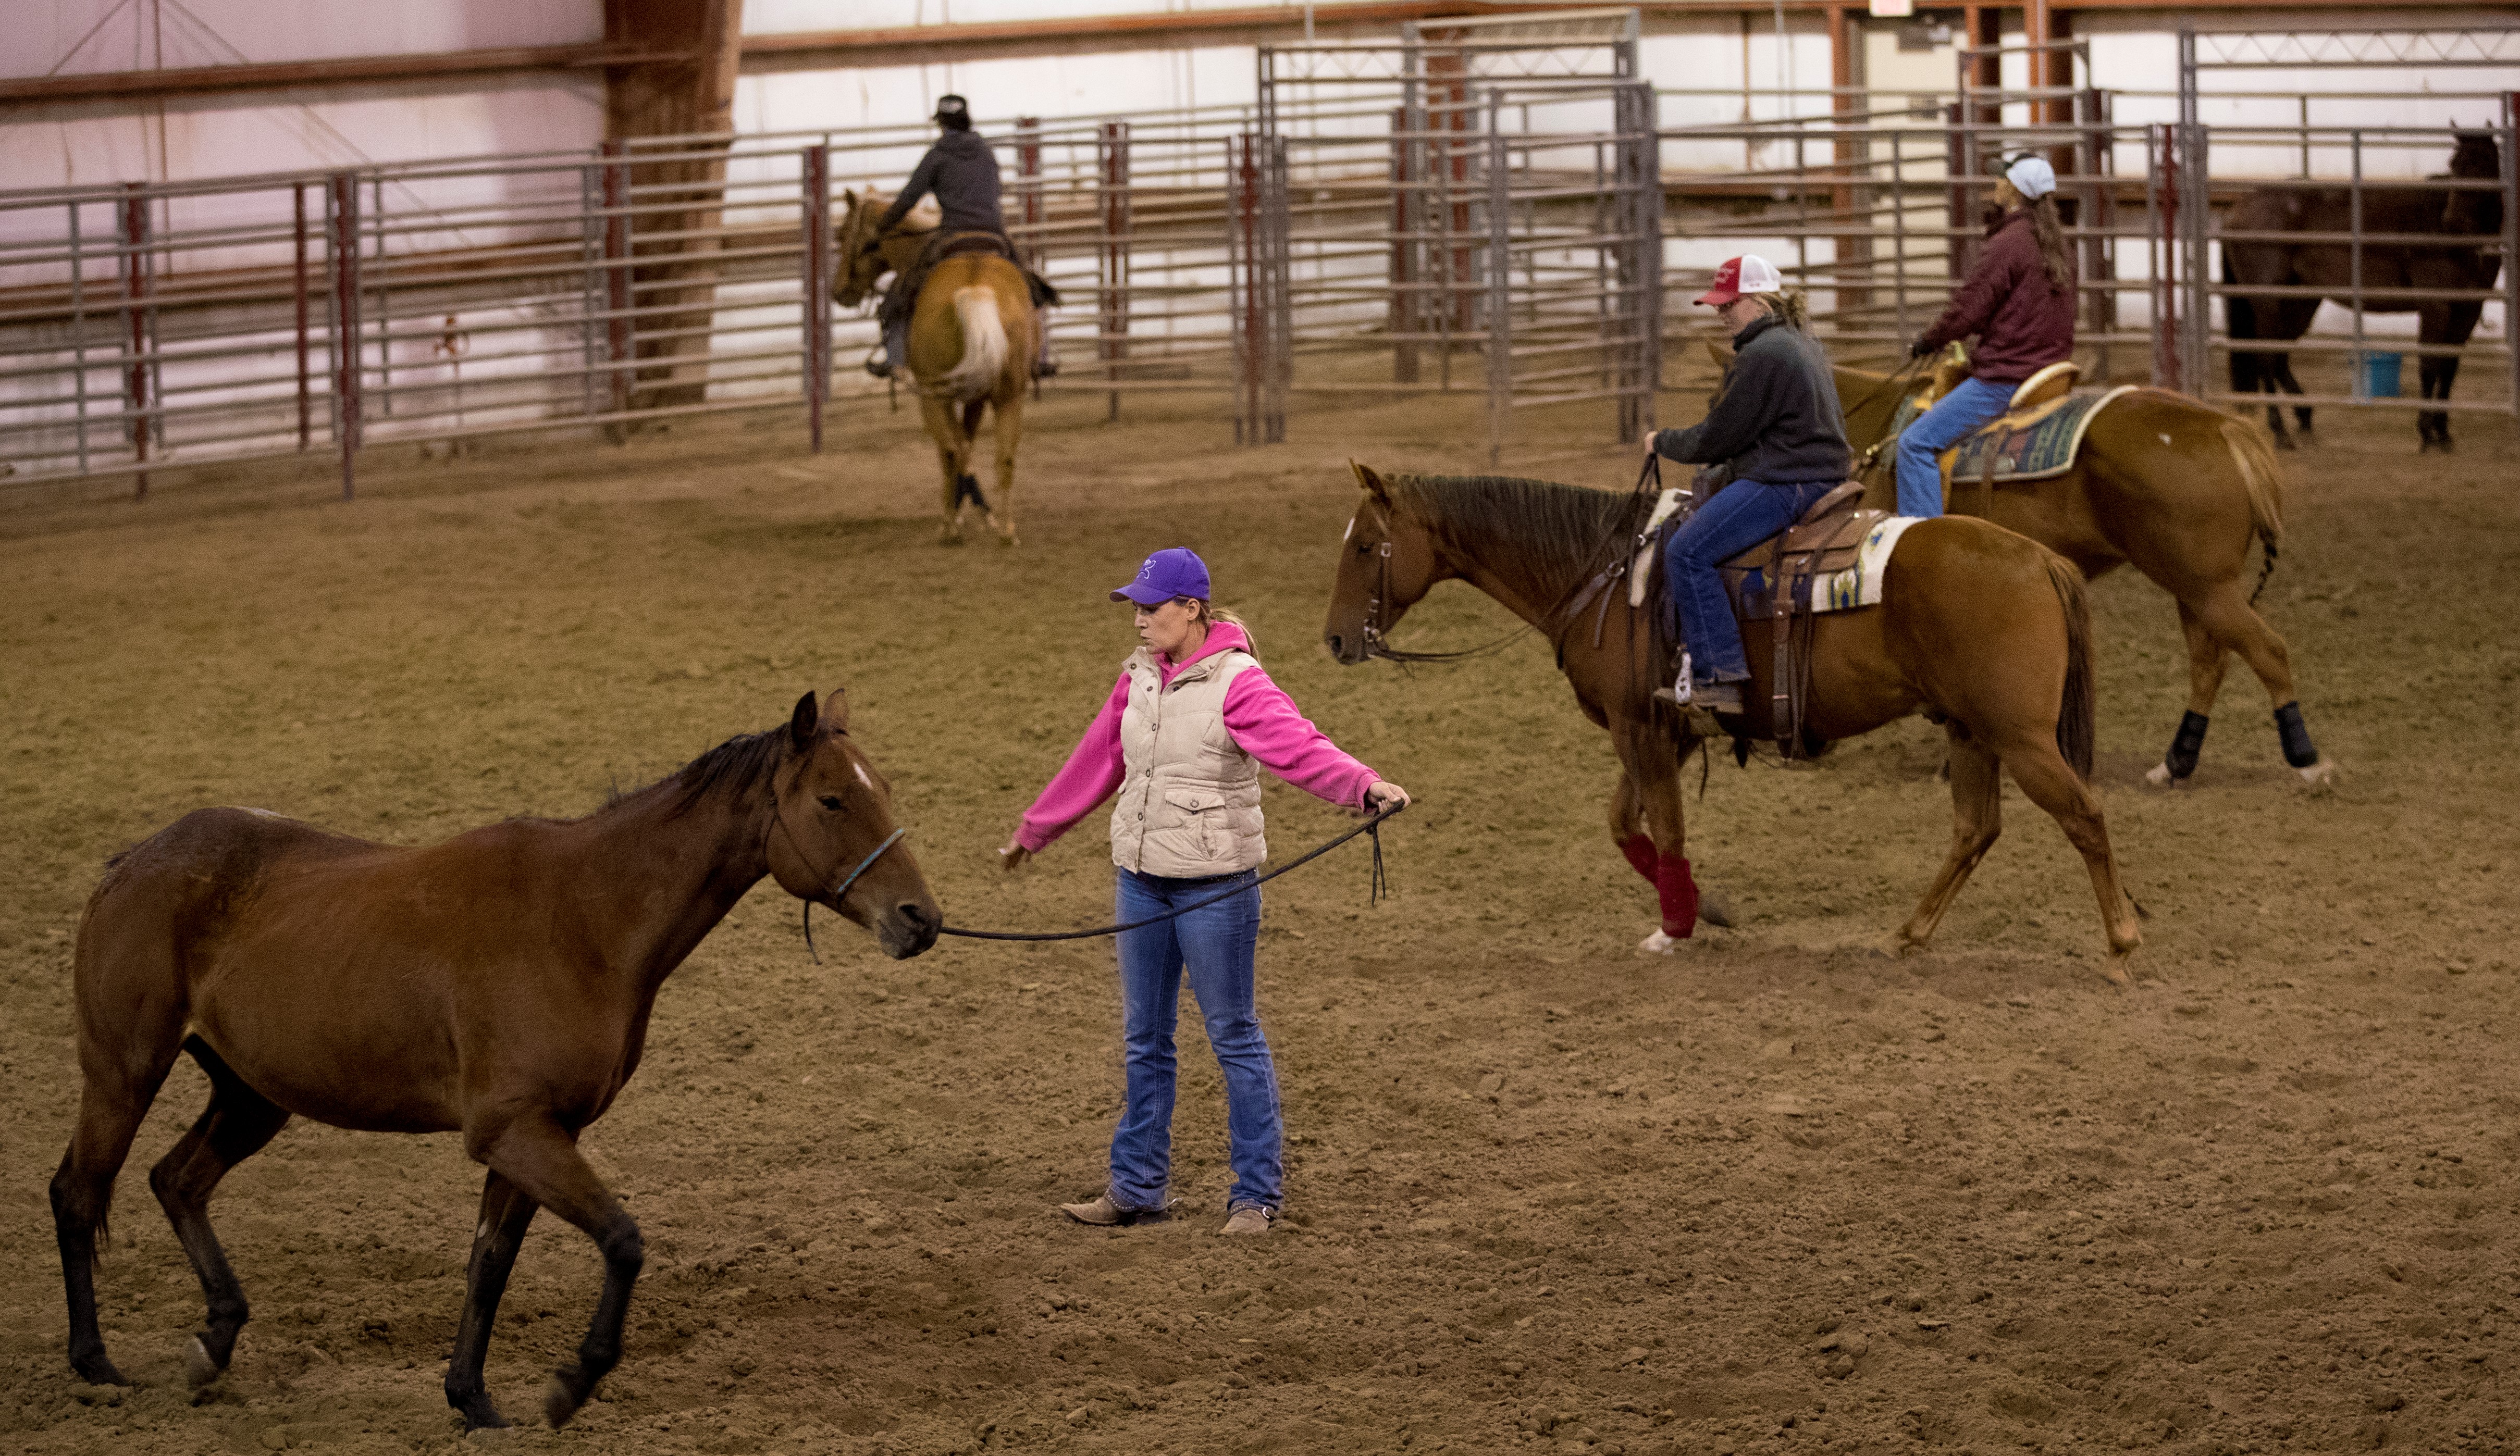 Equine management and Ranch Horse Team students at the Nebraska College of Technical Agriculture work their horses in the indoor arena at the Livestock Teaching Center at the Curtis campus. (NCTA Photo by Craig Chandler / University Communication.)